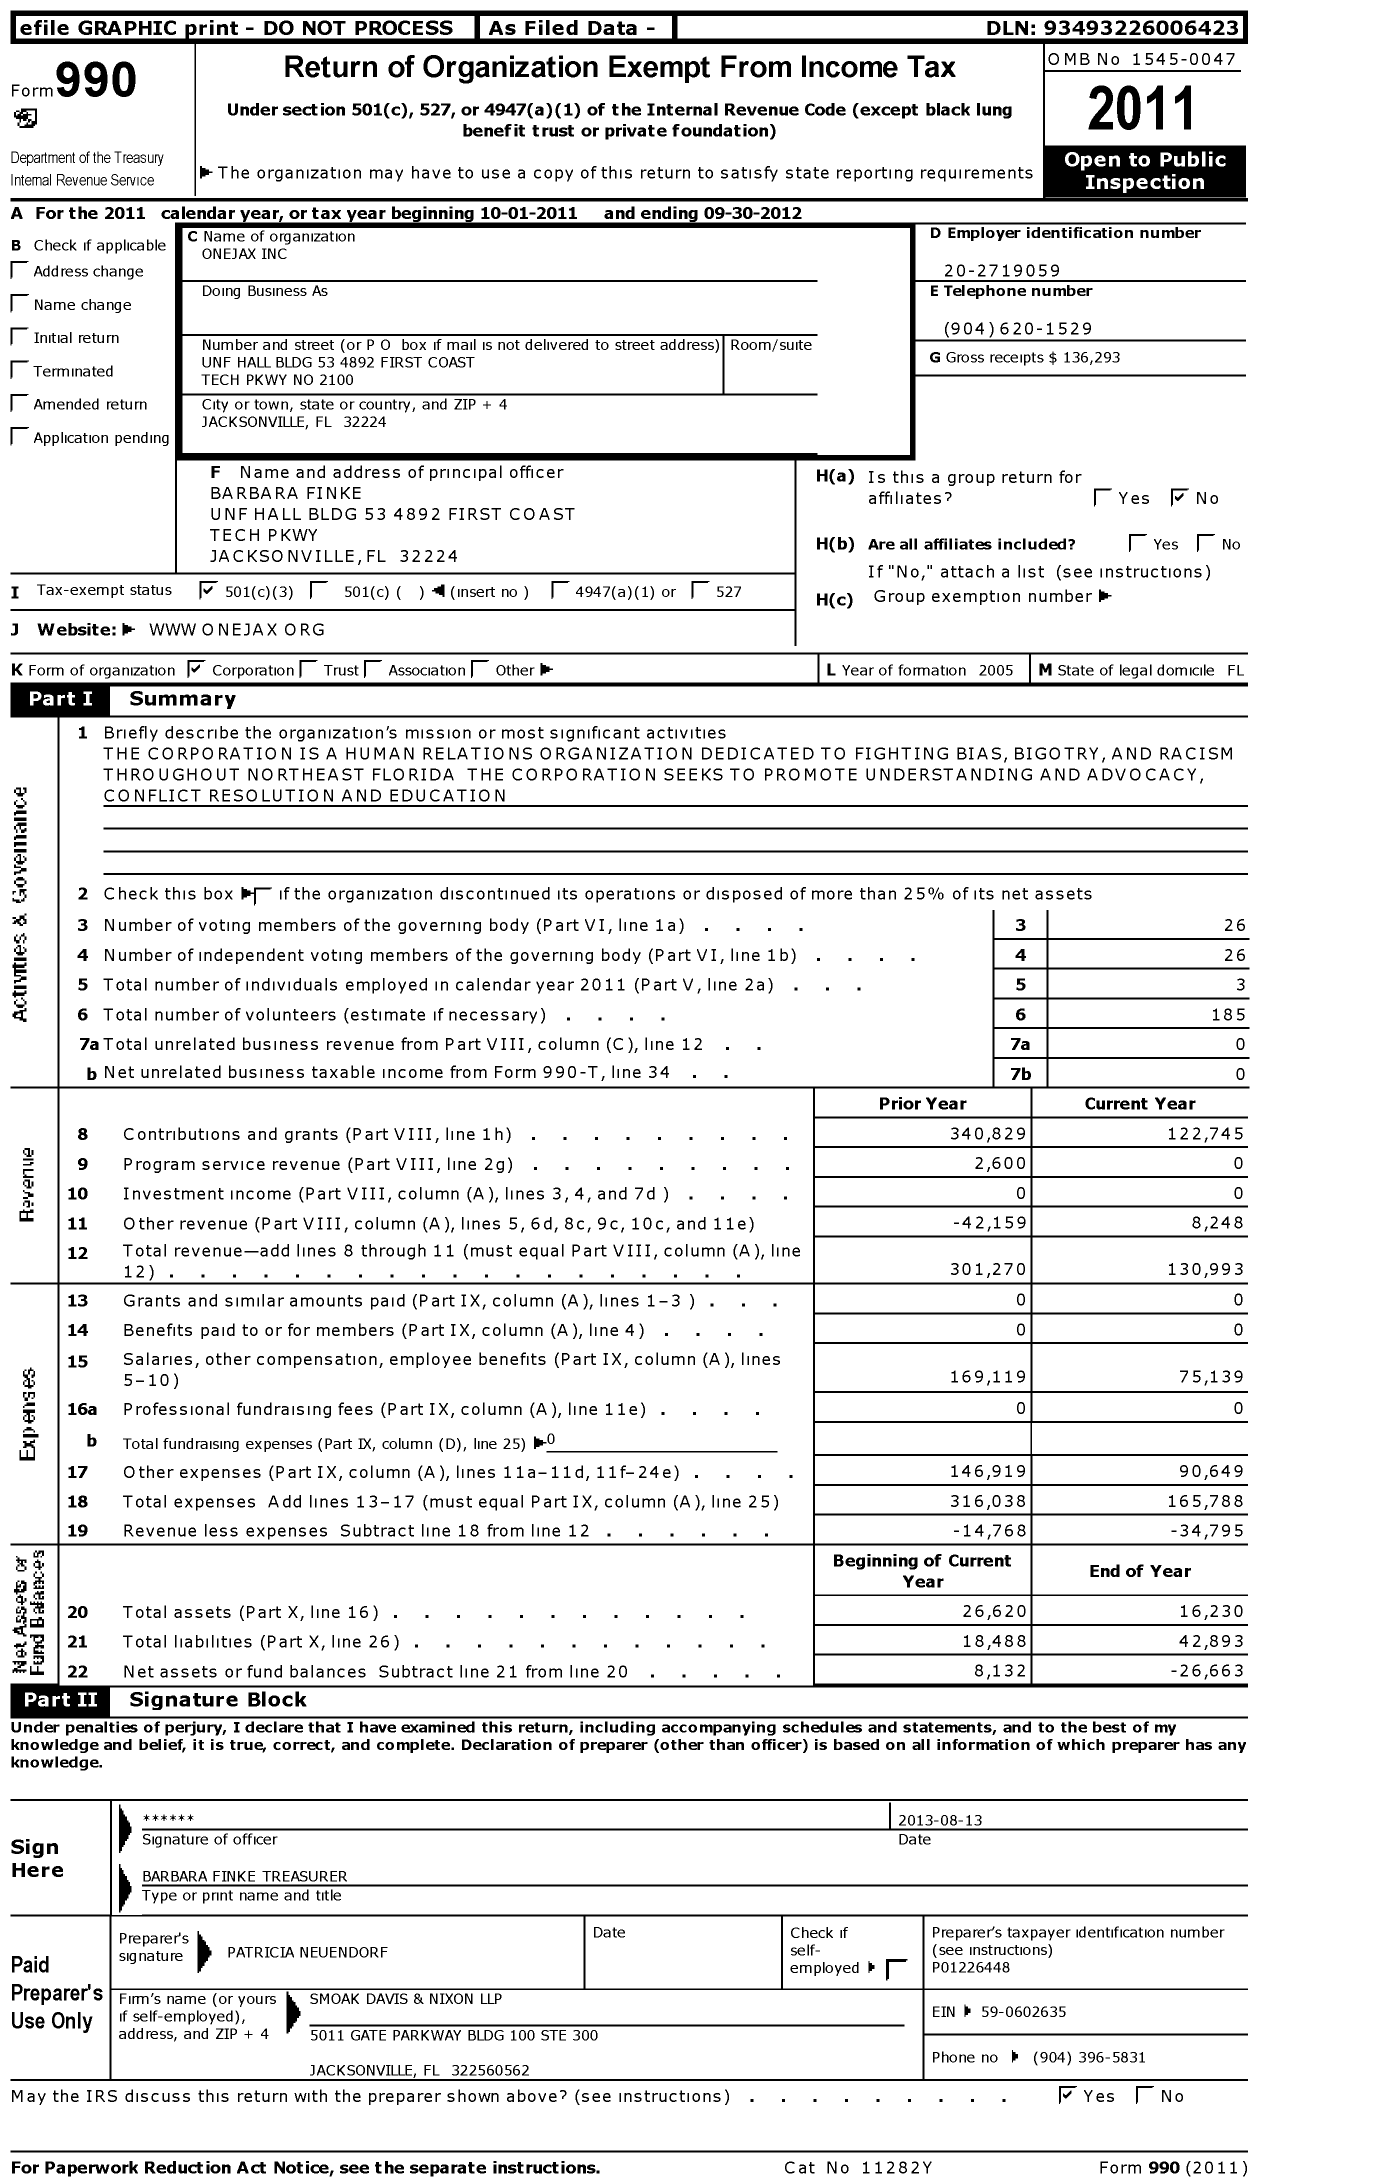 Image of first page of 2011 Form 990 for Onejax